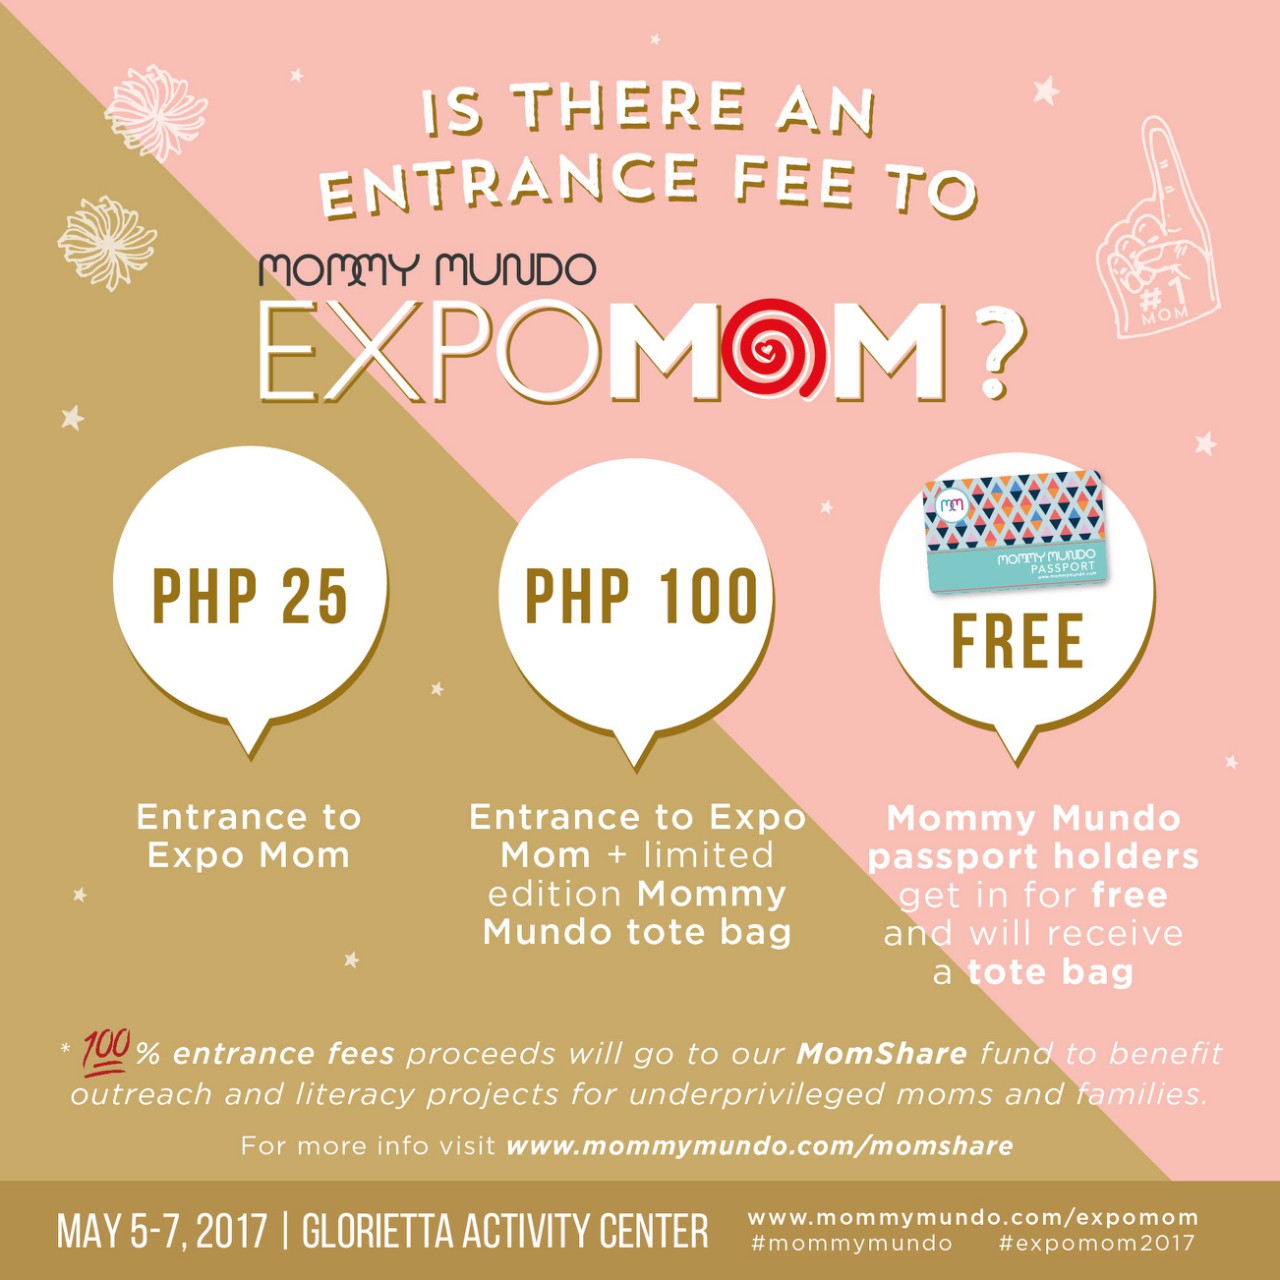 Guide to the Entrance Fee at Expo Mom 2017